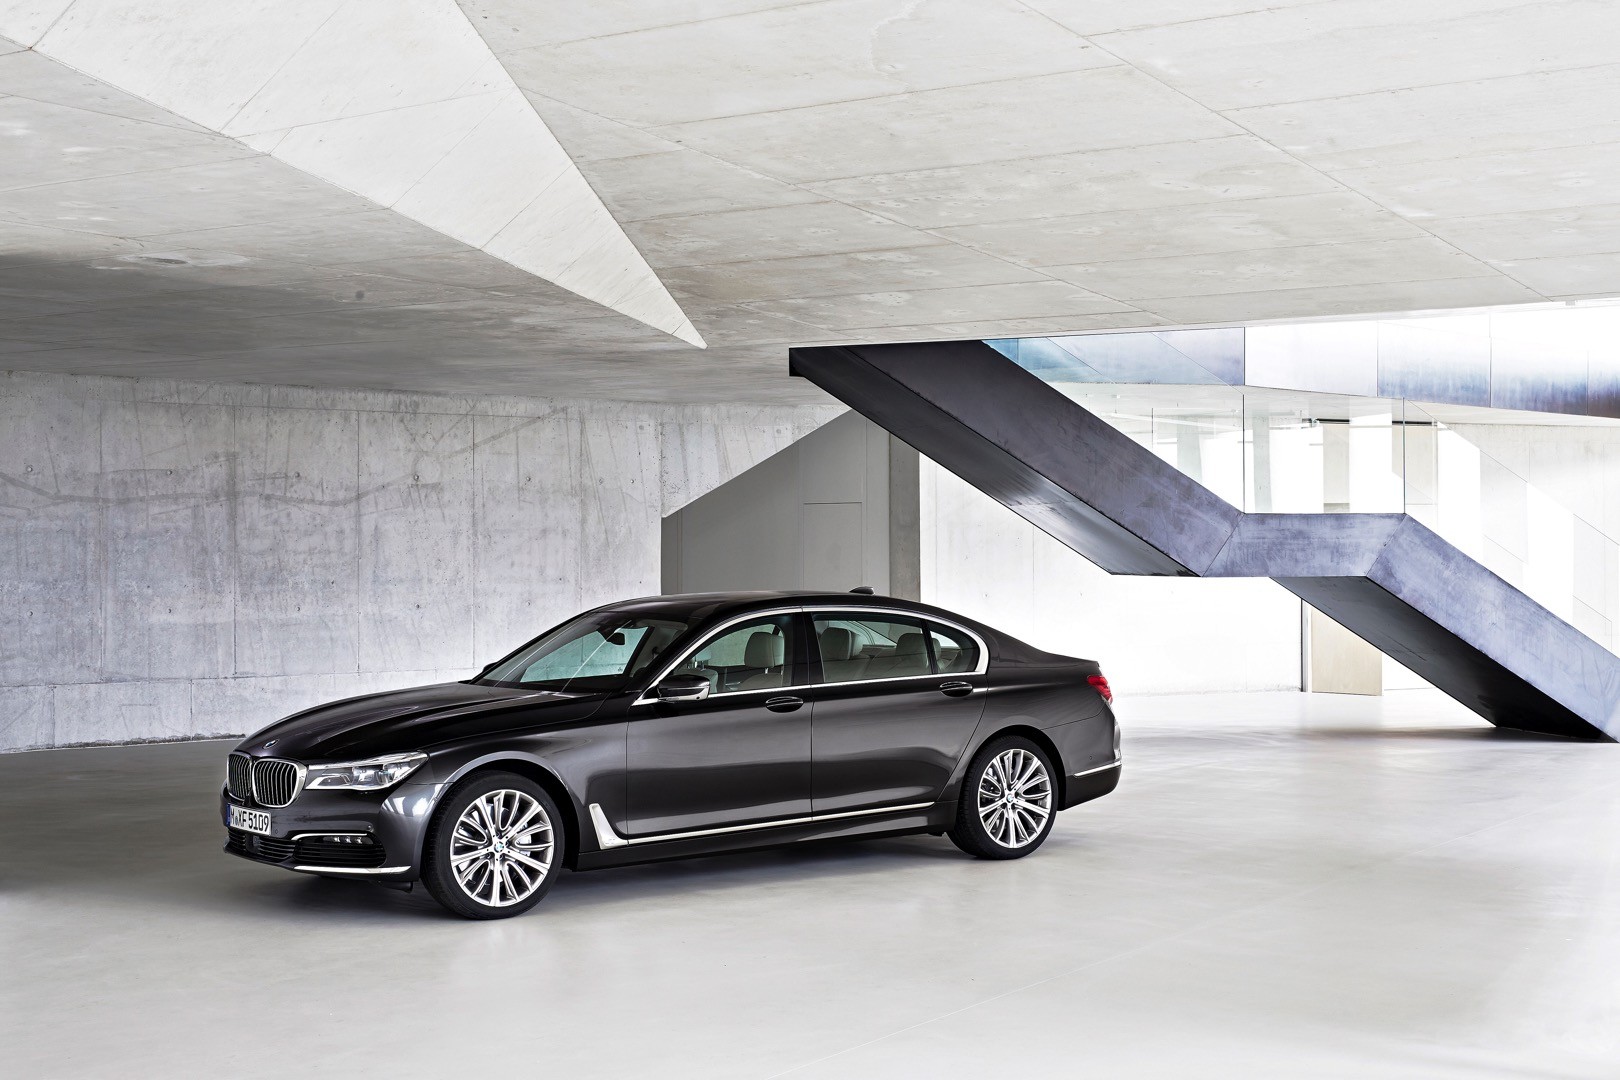 2016-bmw-7-series-finally-officially-unveiled-the-good-stuffs-inside-photo-gallery_21